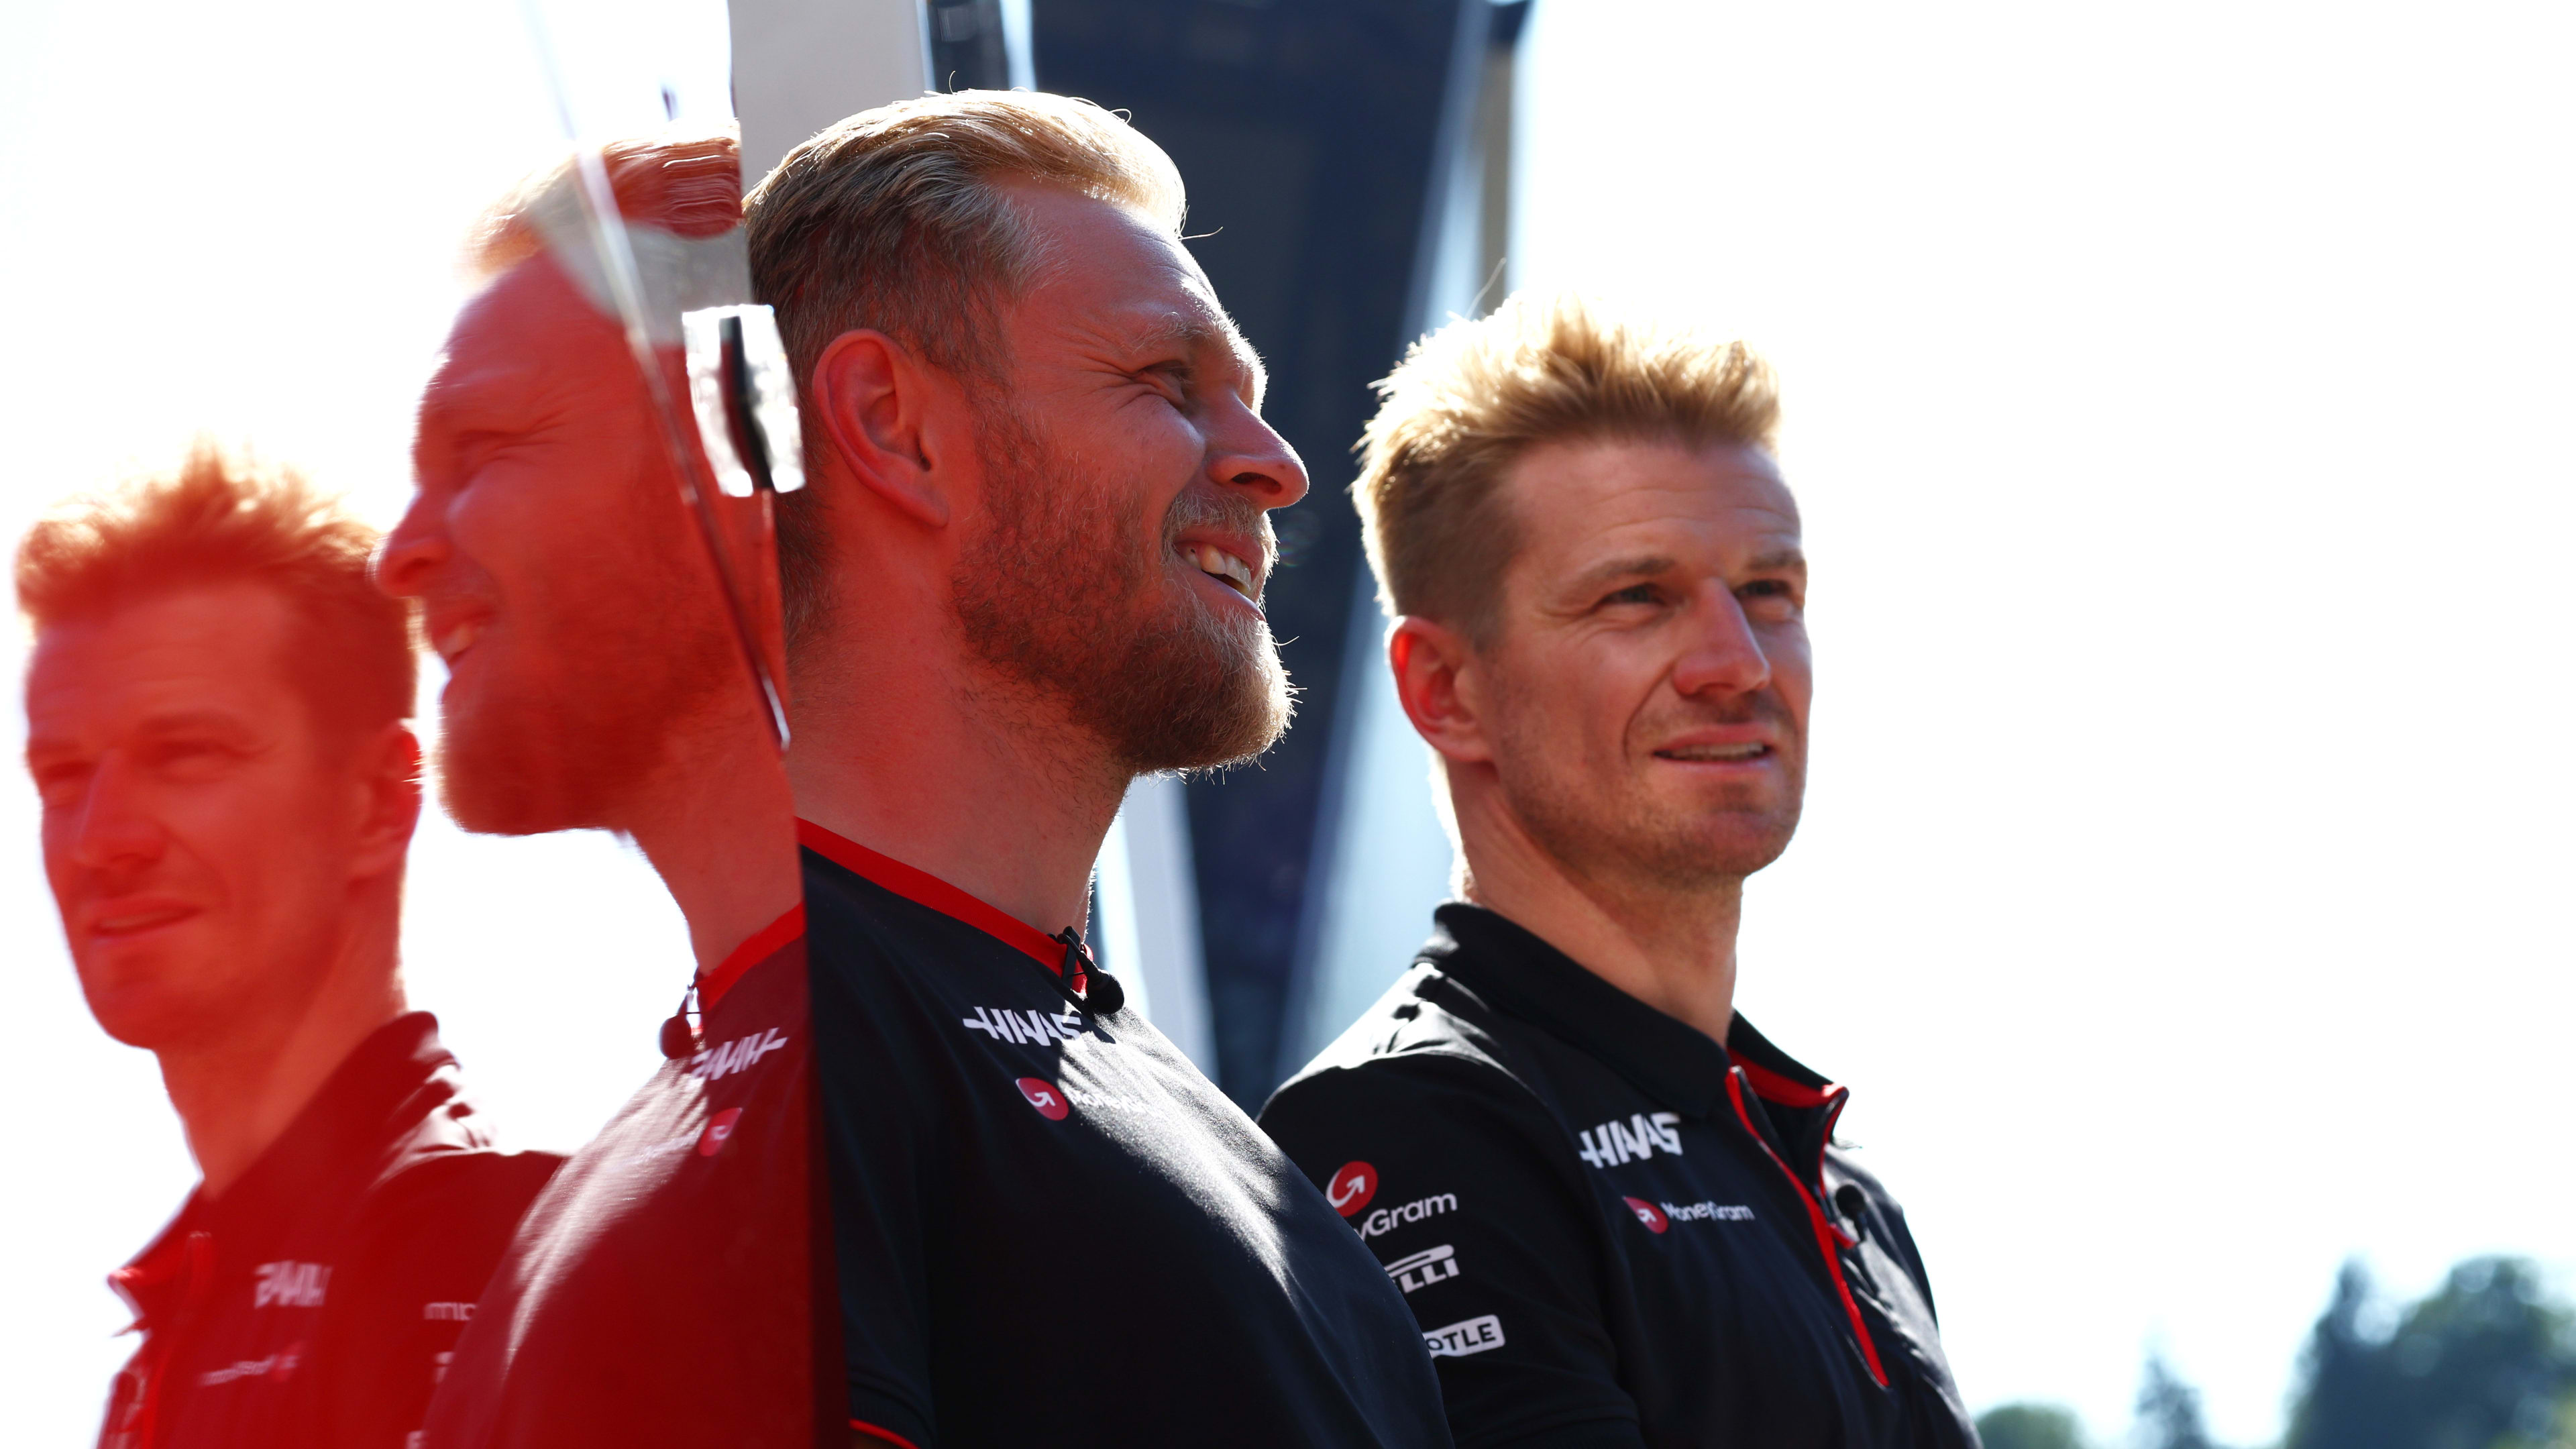 SPIELBERG, AUSTRIA - JUNE 29: Kevin Magnussen of Denmark and Haas F1 and Nico Hulkenberg of Germany